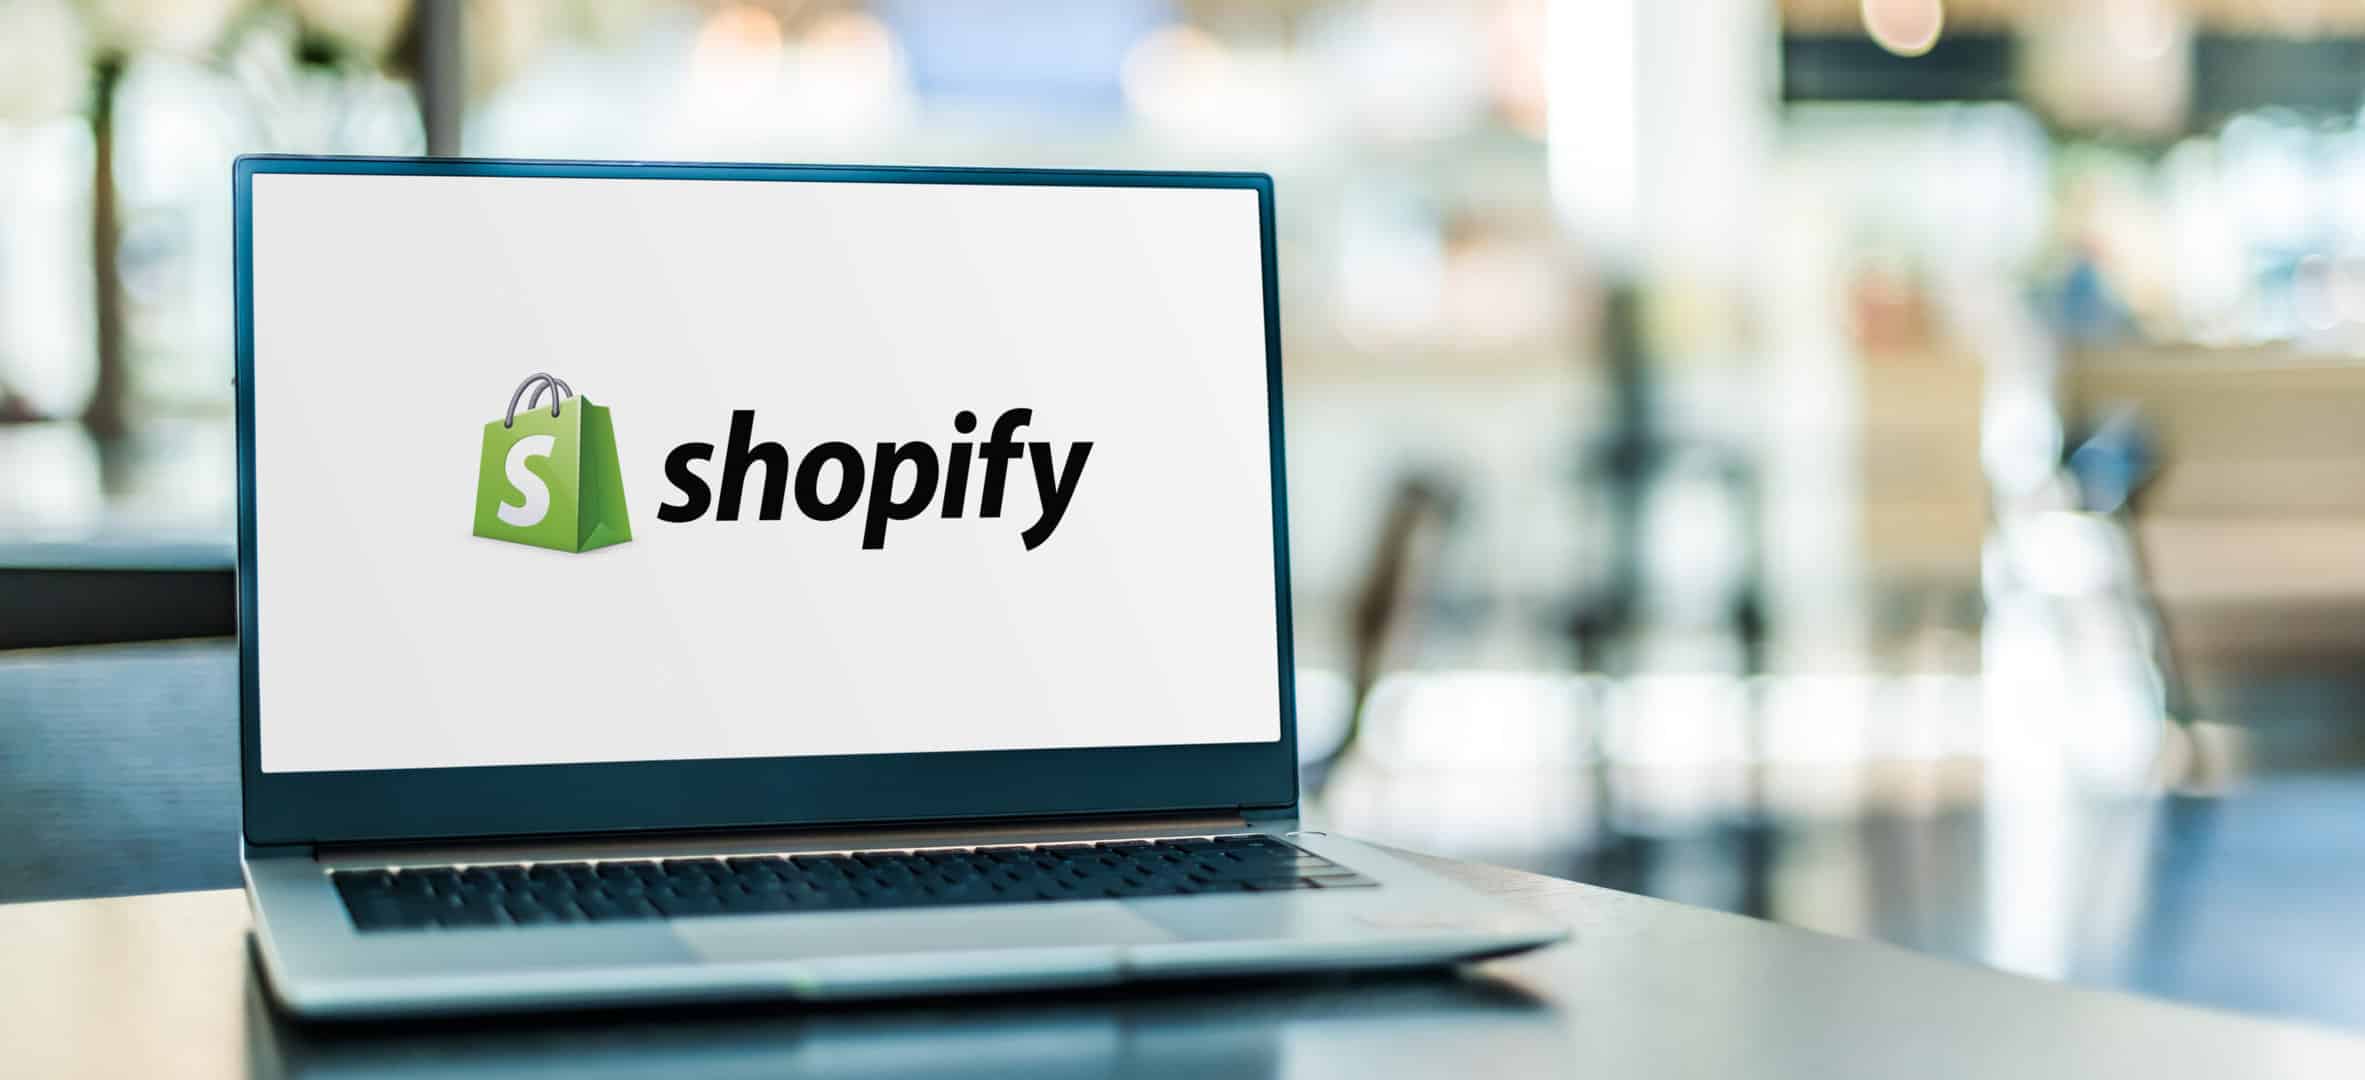 shopify tips to improve SEO